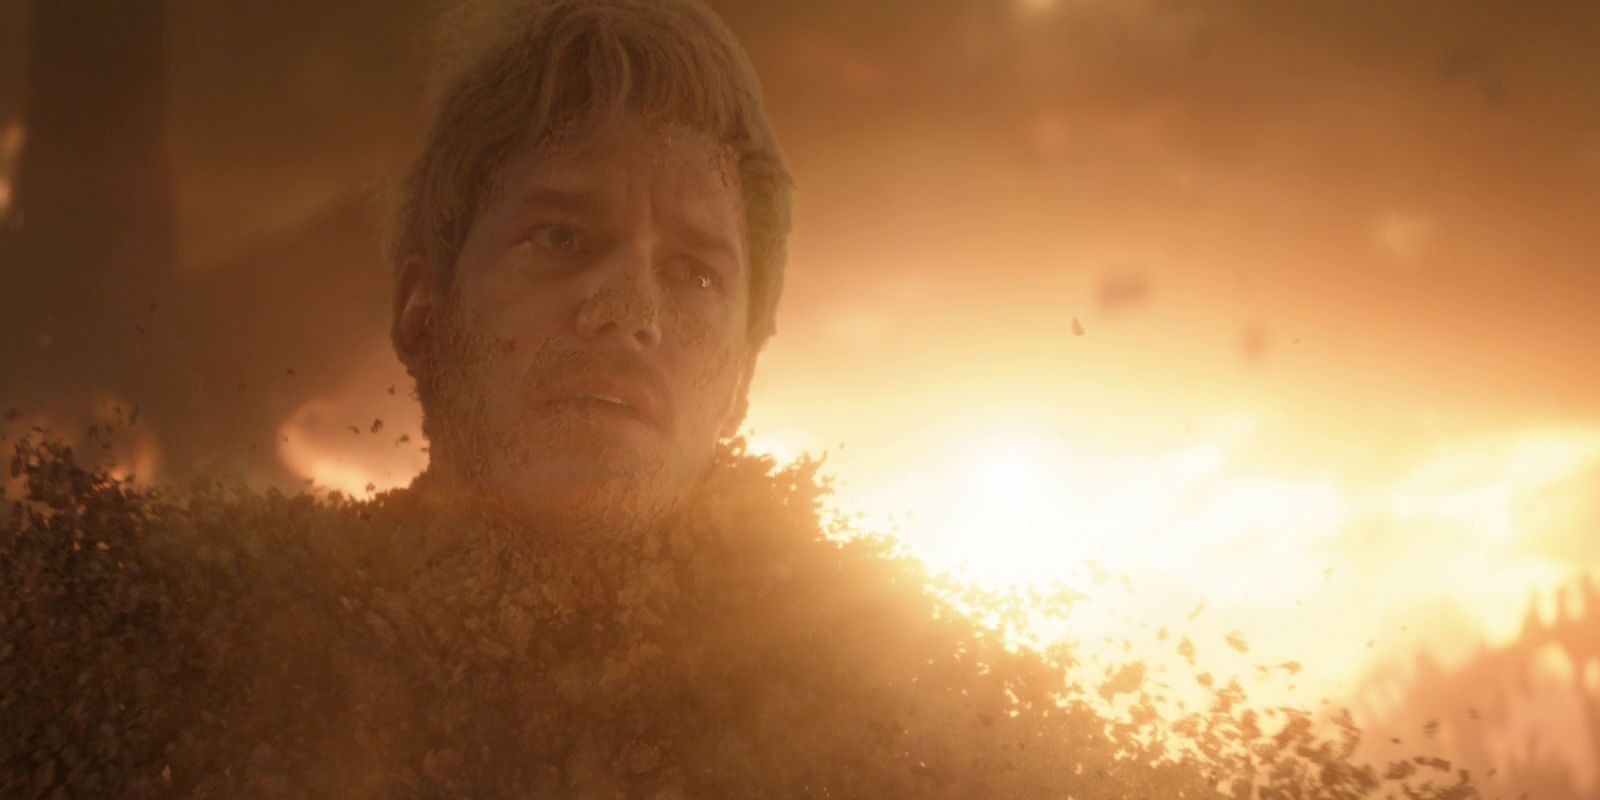 Star-Lord turns to dust in Avengers Infinity War